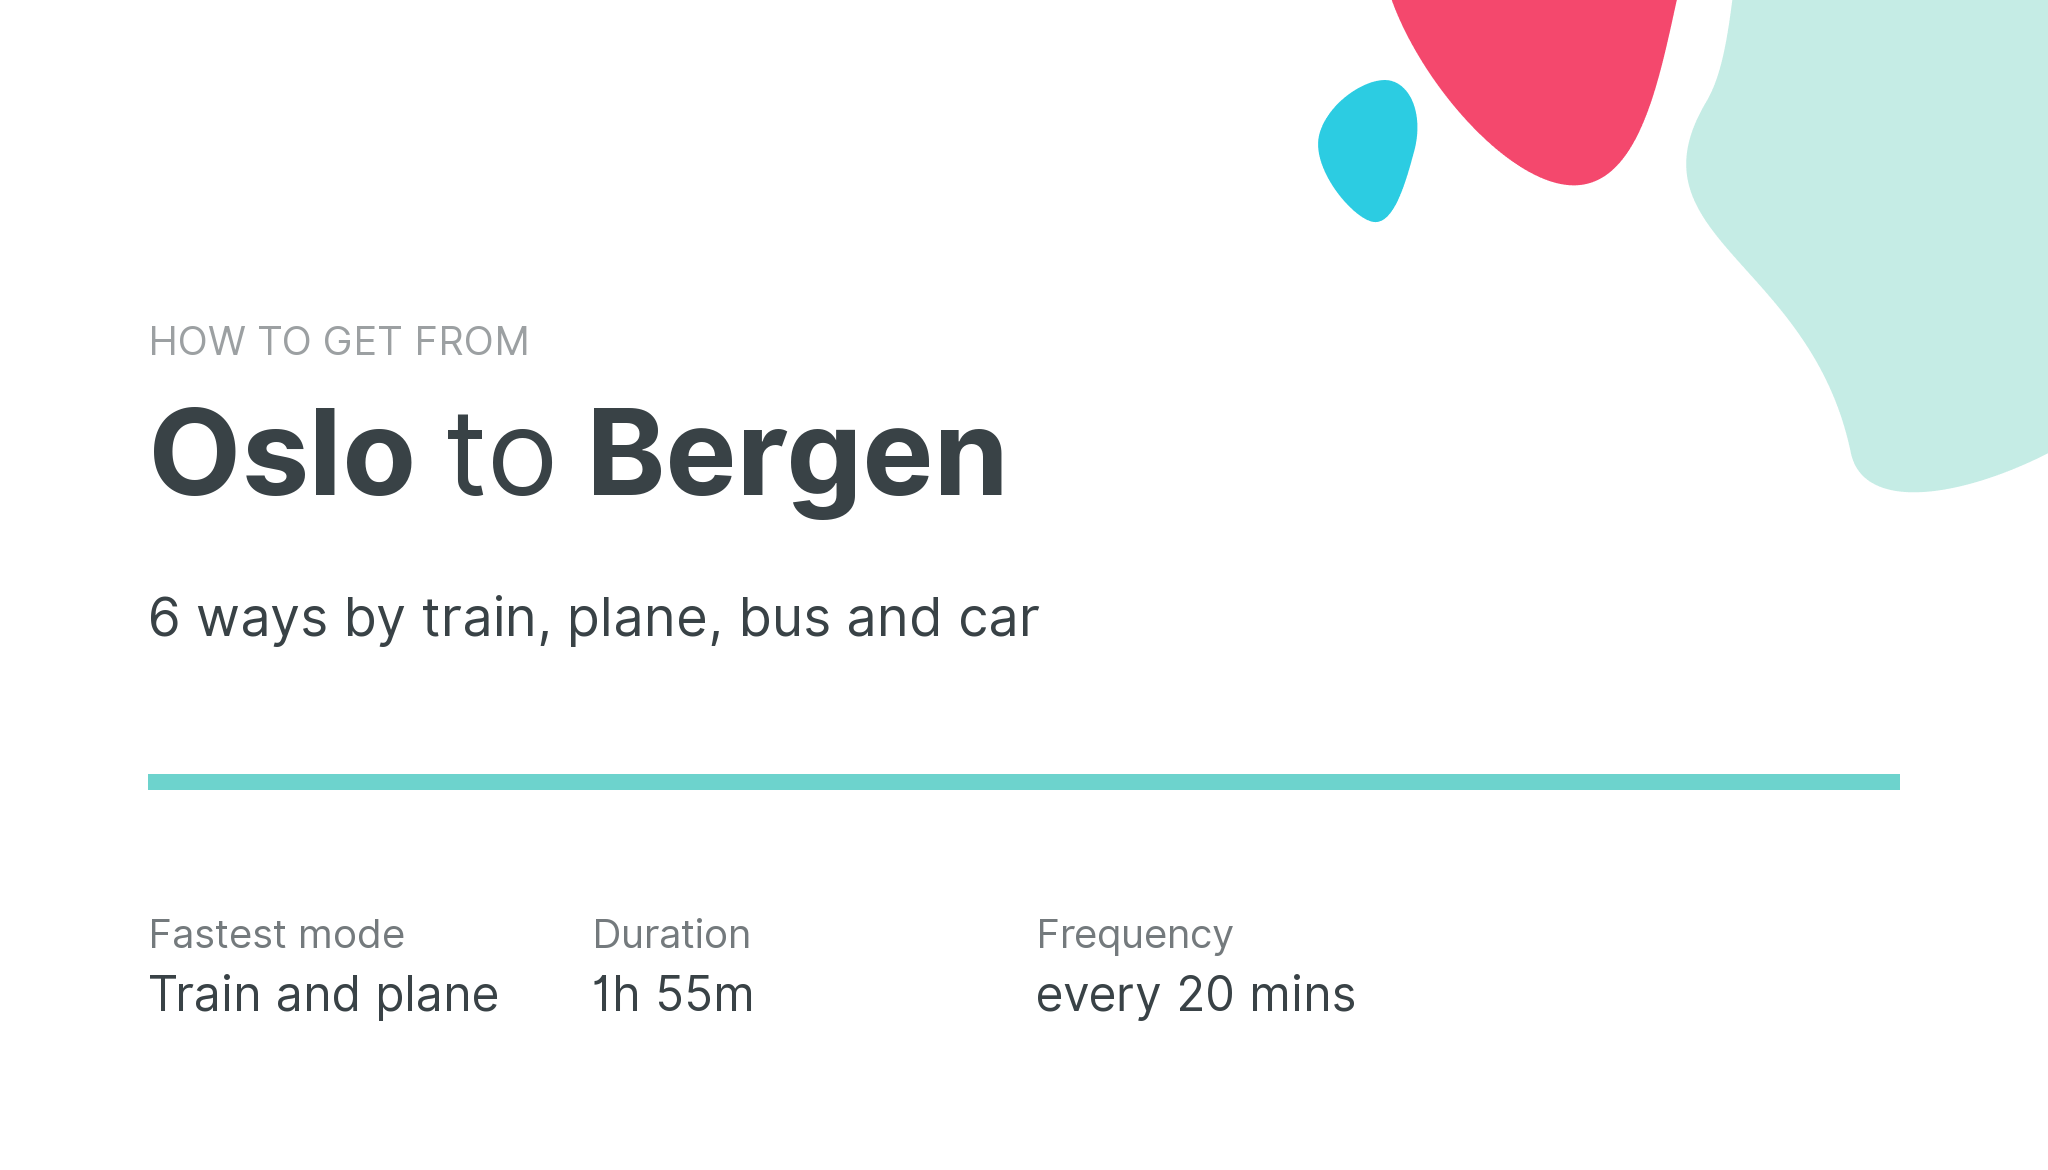 How do I get from Oslo to Bergen